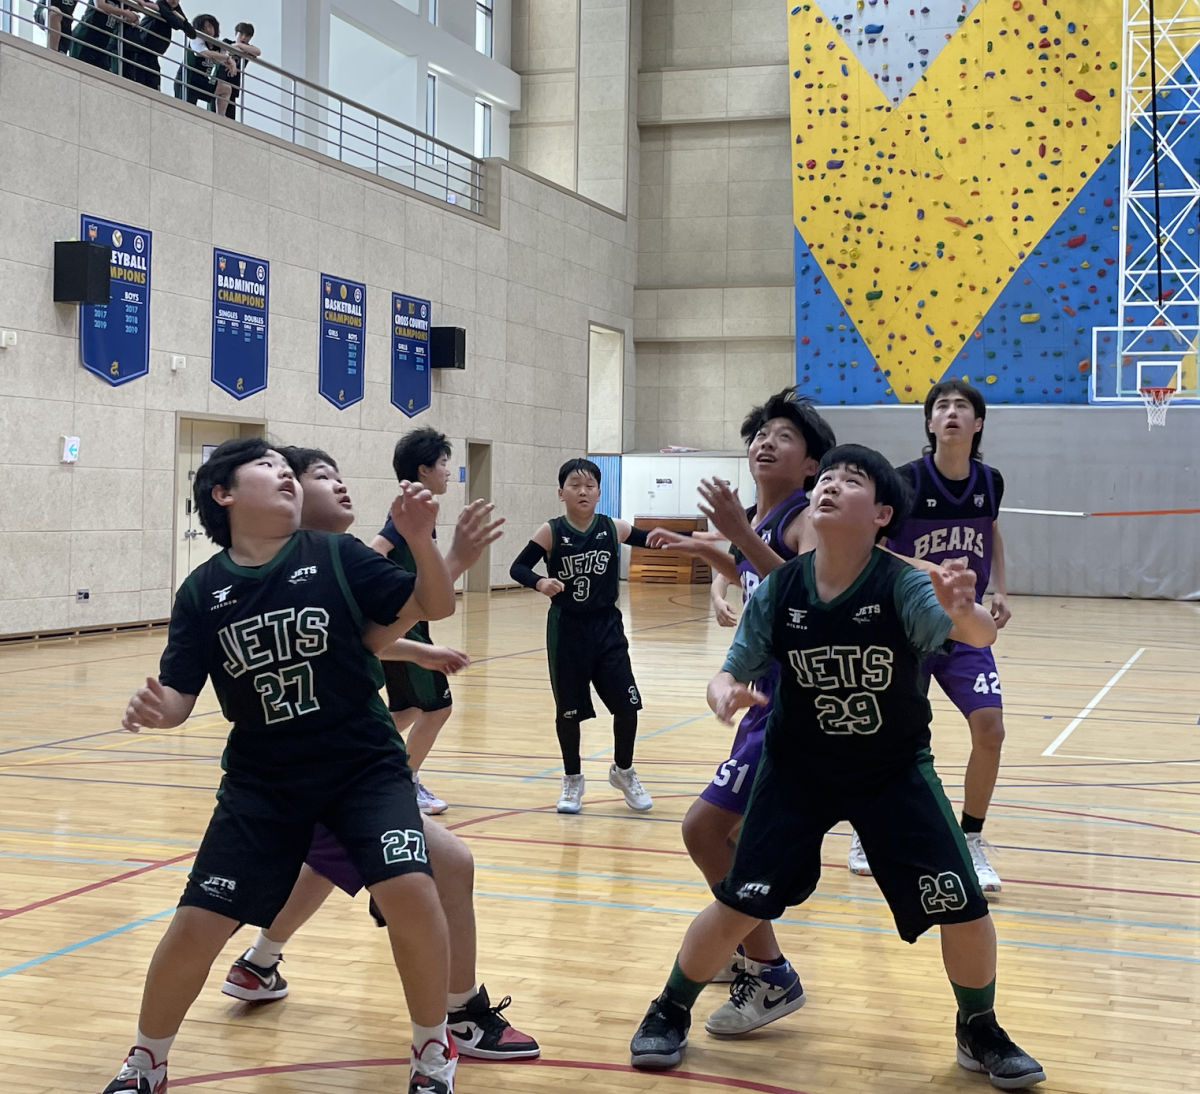 Kevin Ahn (number 27) and Daniel Beck (number 29) box out the opponent for a board. Kevin wins the rebound, takes a drop step, and finishes through defense.